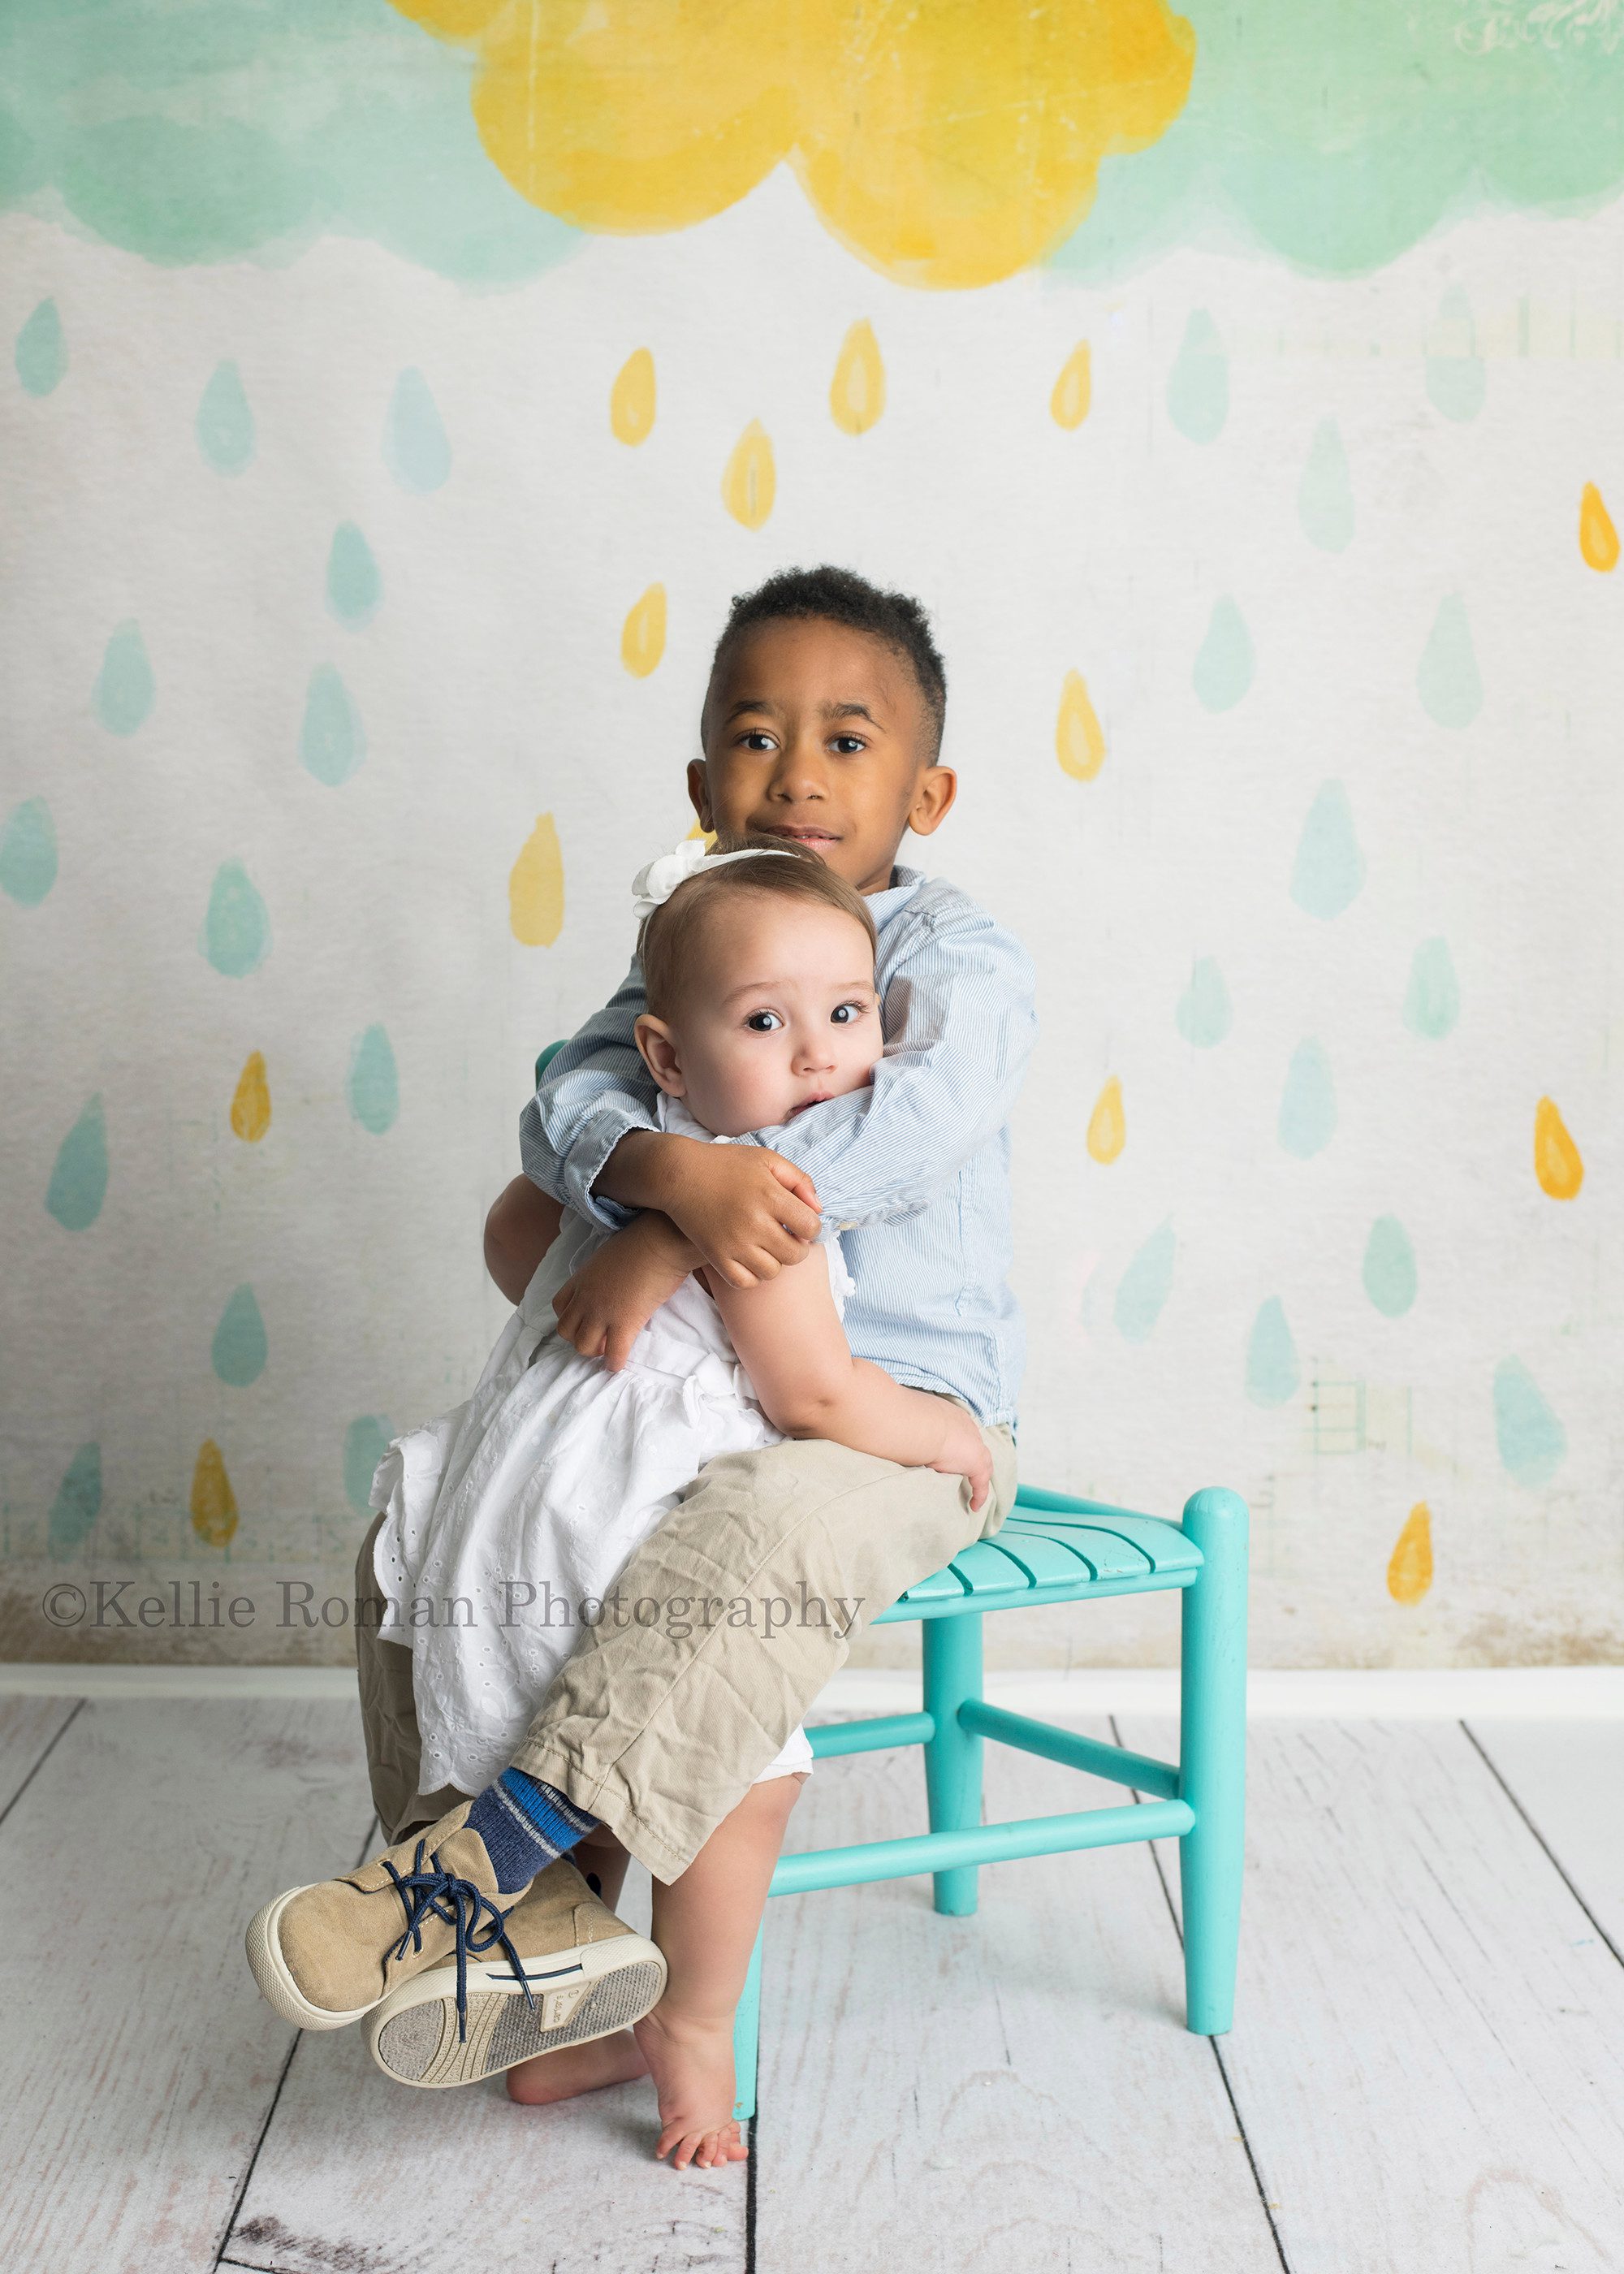 dig in a brother and sister in Milwaukee photographer studio having photo session. boy is sitting on a teal chair and is hugging his little sister from the side. they are in front of a colored cloud backdrop with raindrops.